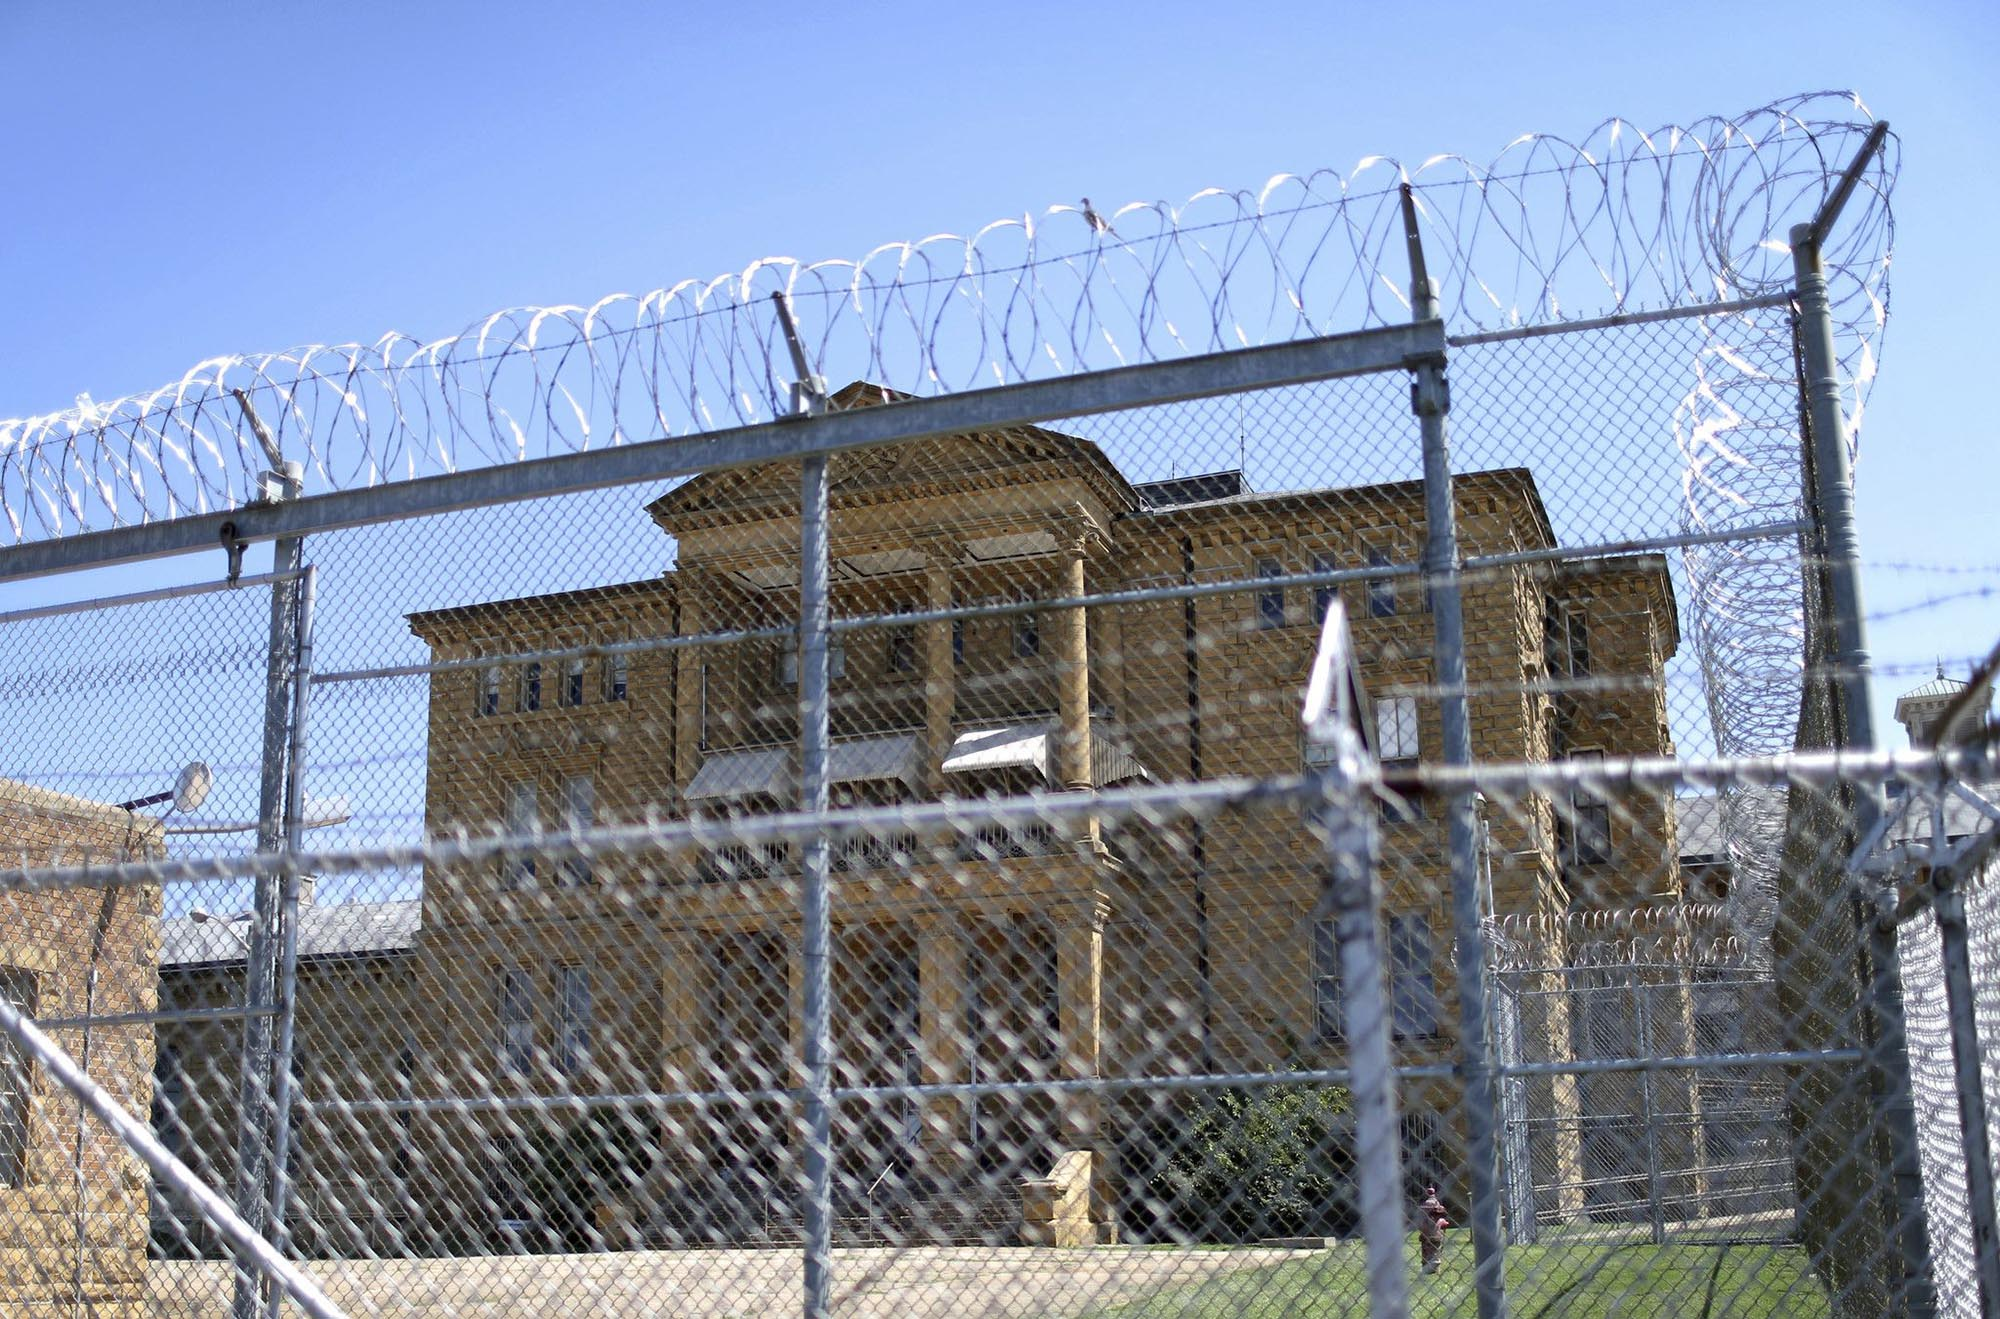 Legal groups call for end to long-term solitary confinement in Illinois